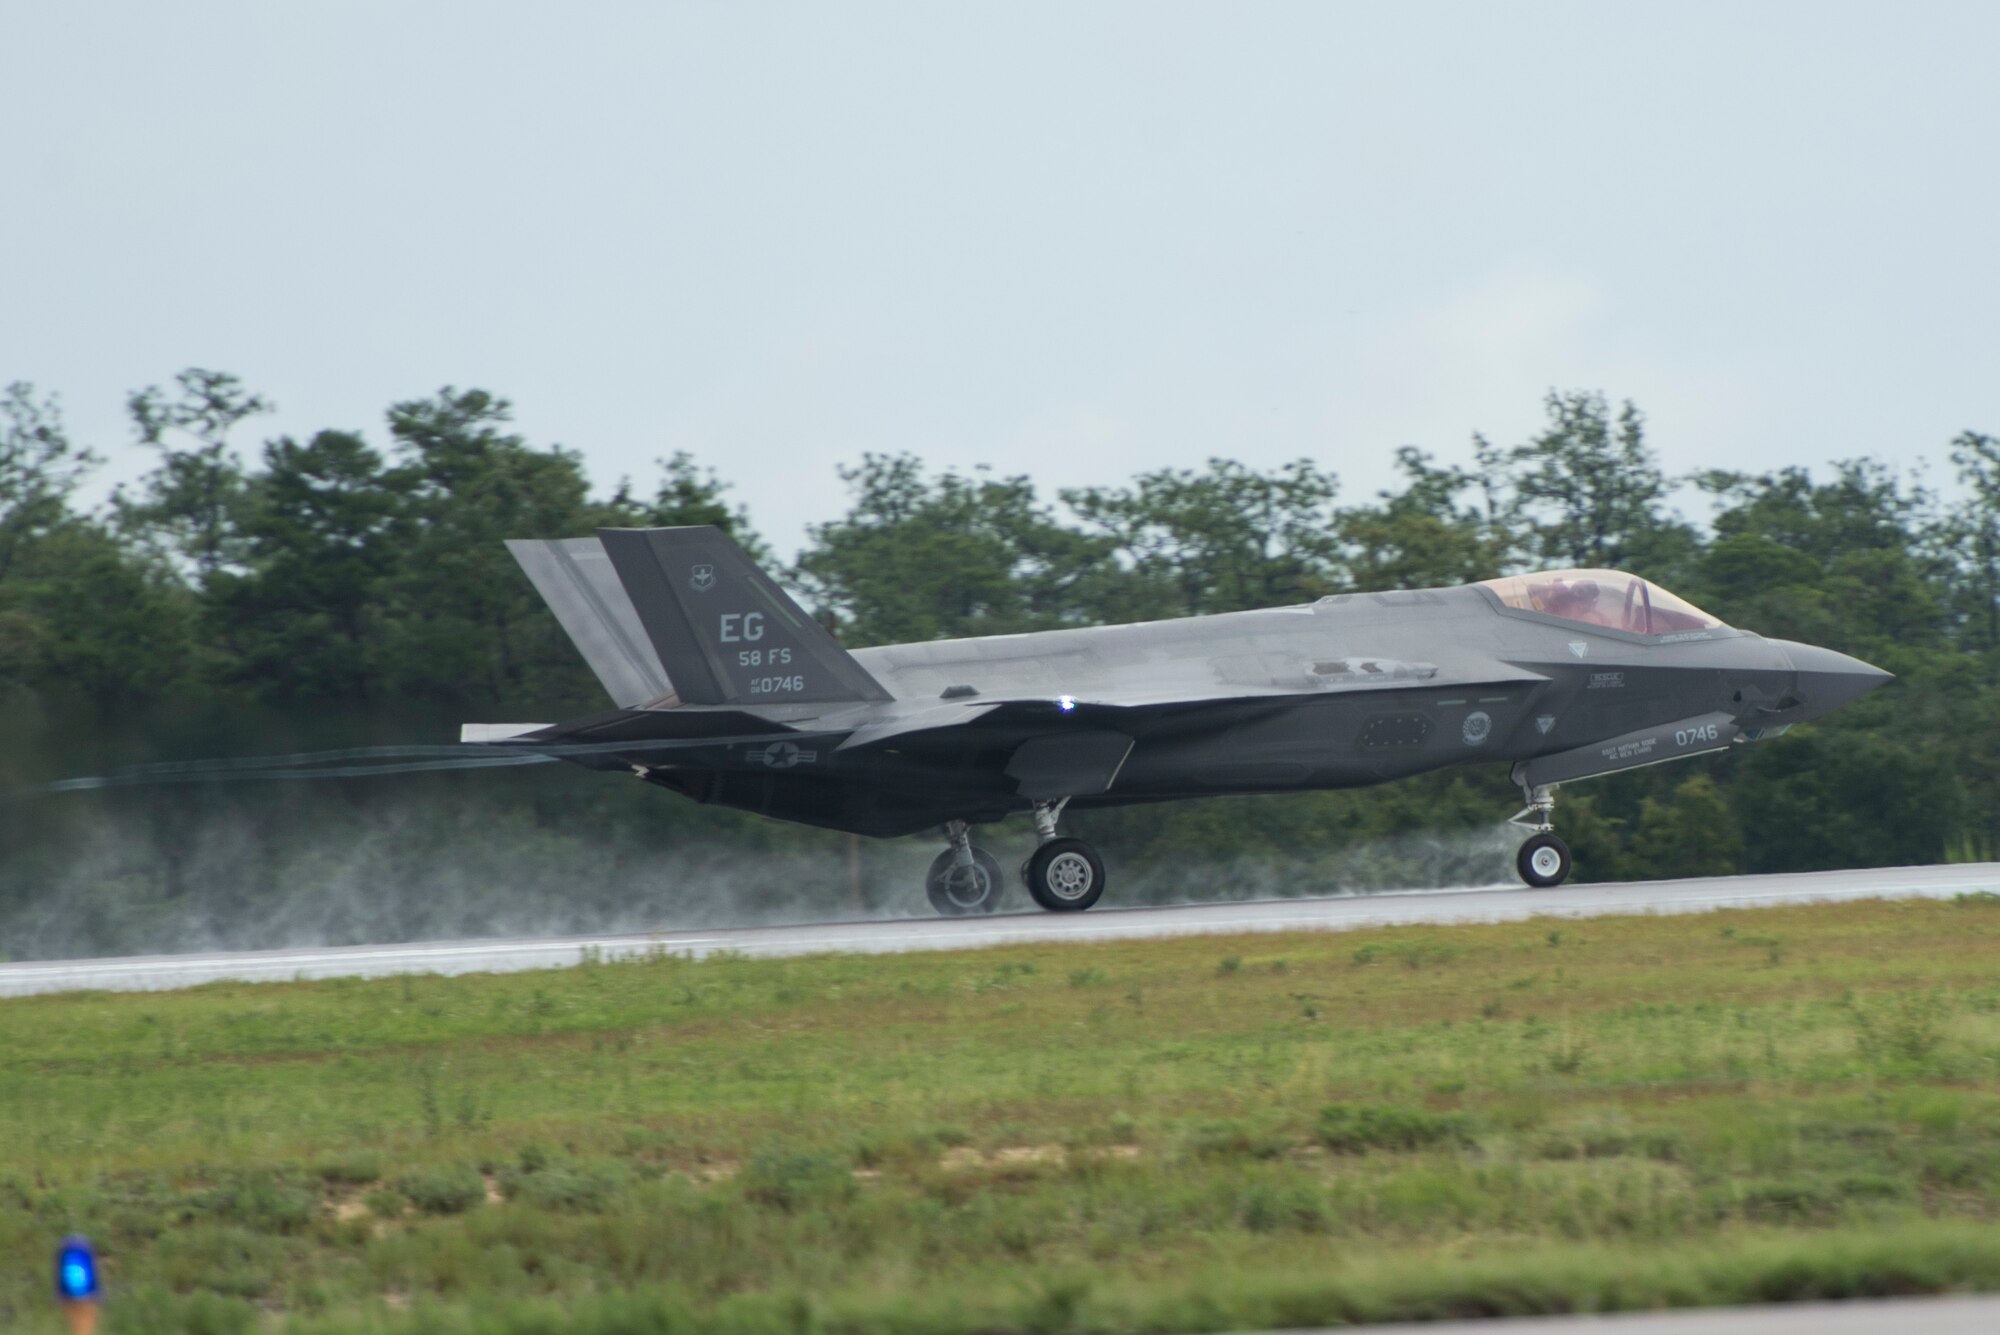 An F-35A takes off from Eglin Air Force Base, Fla. Aug. 2, 2016. The F-35A is the latest deployable fifth generation aircraft capable of providing air superiority, interdiction, suppression of enemy air defenses and close air support as well as high-fidelity command and control functions through fused sensors, and provide pilots with unprecedented situational awareness of the battlespace. (U.S. Air Force photo by Senior Airman Stormy Archer)